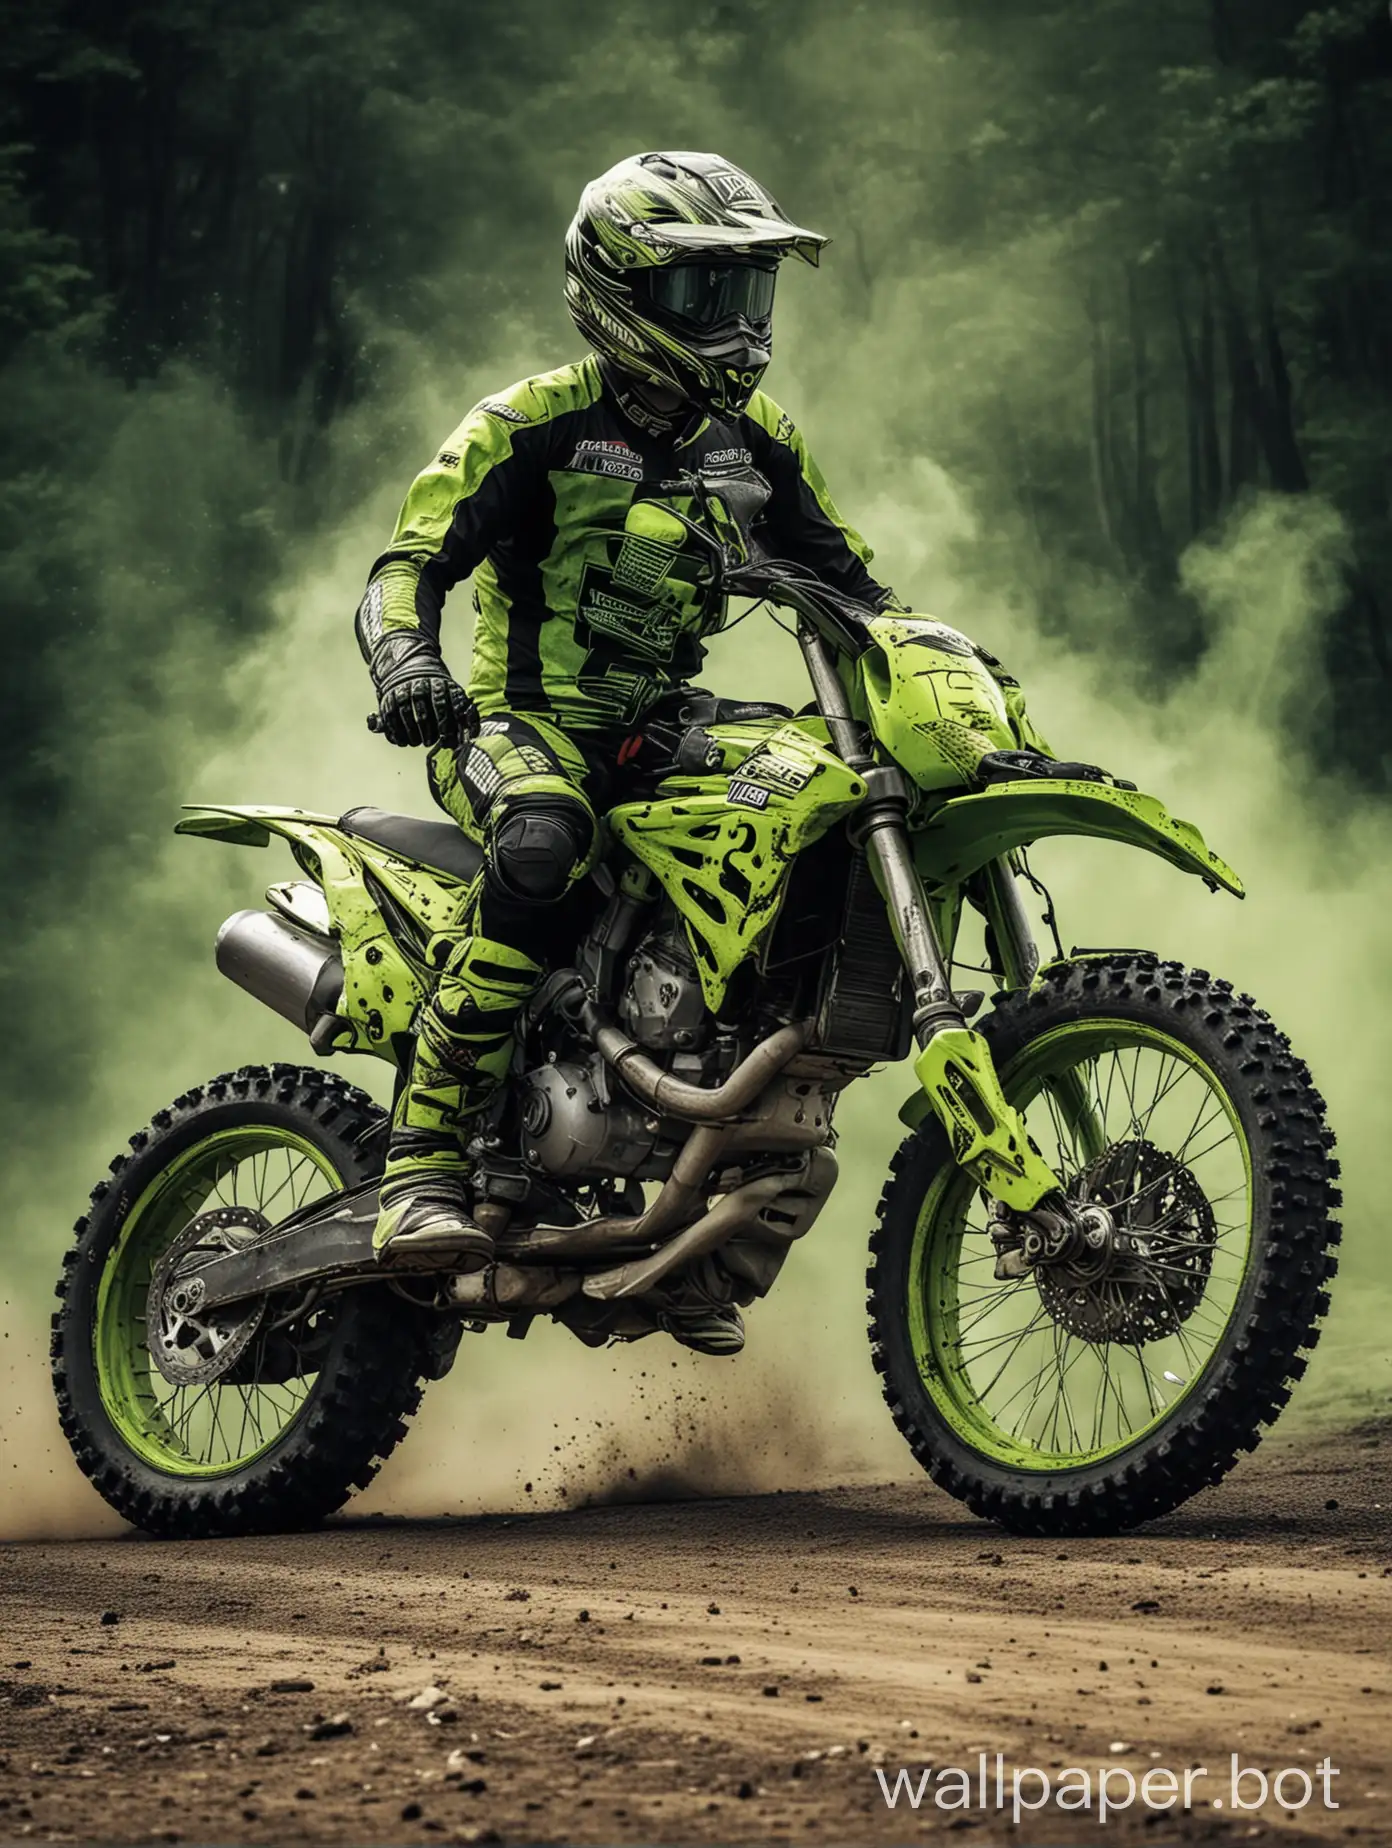 Intense-Moto-Race-with-Acid-Green-Bike-Vibrant-Poster-Background